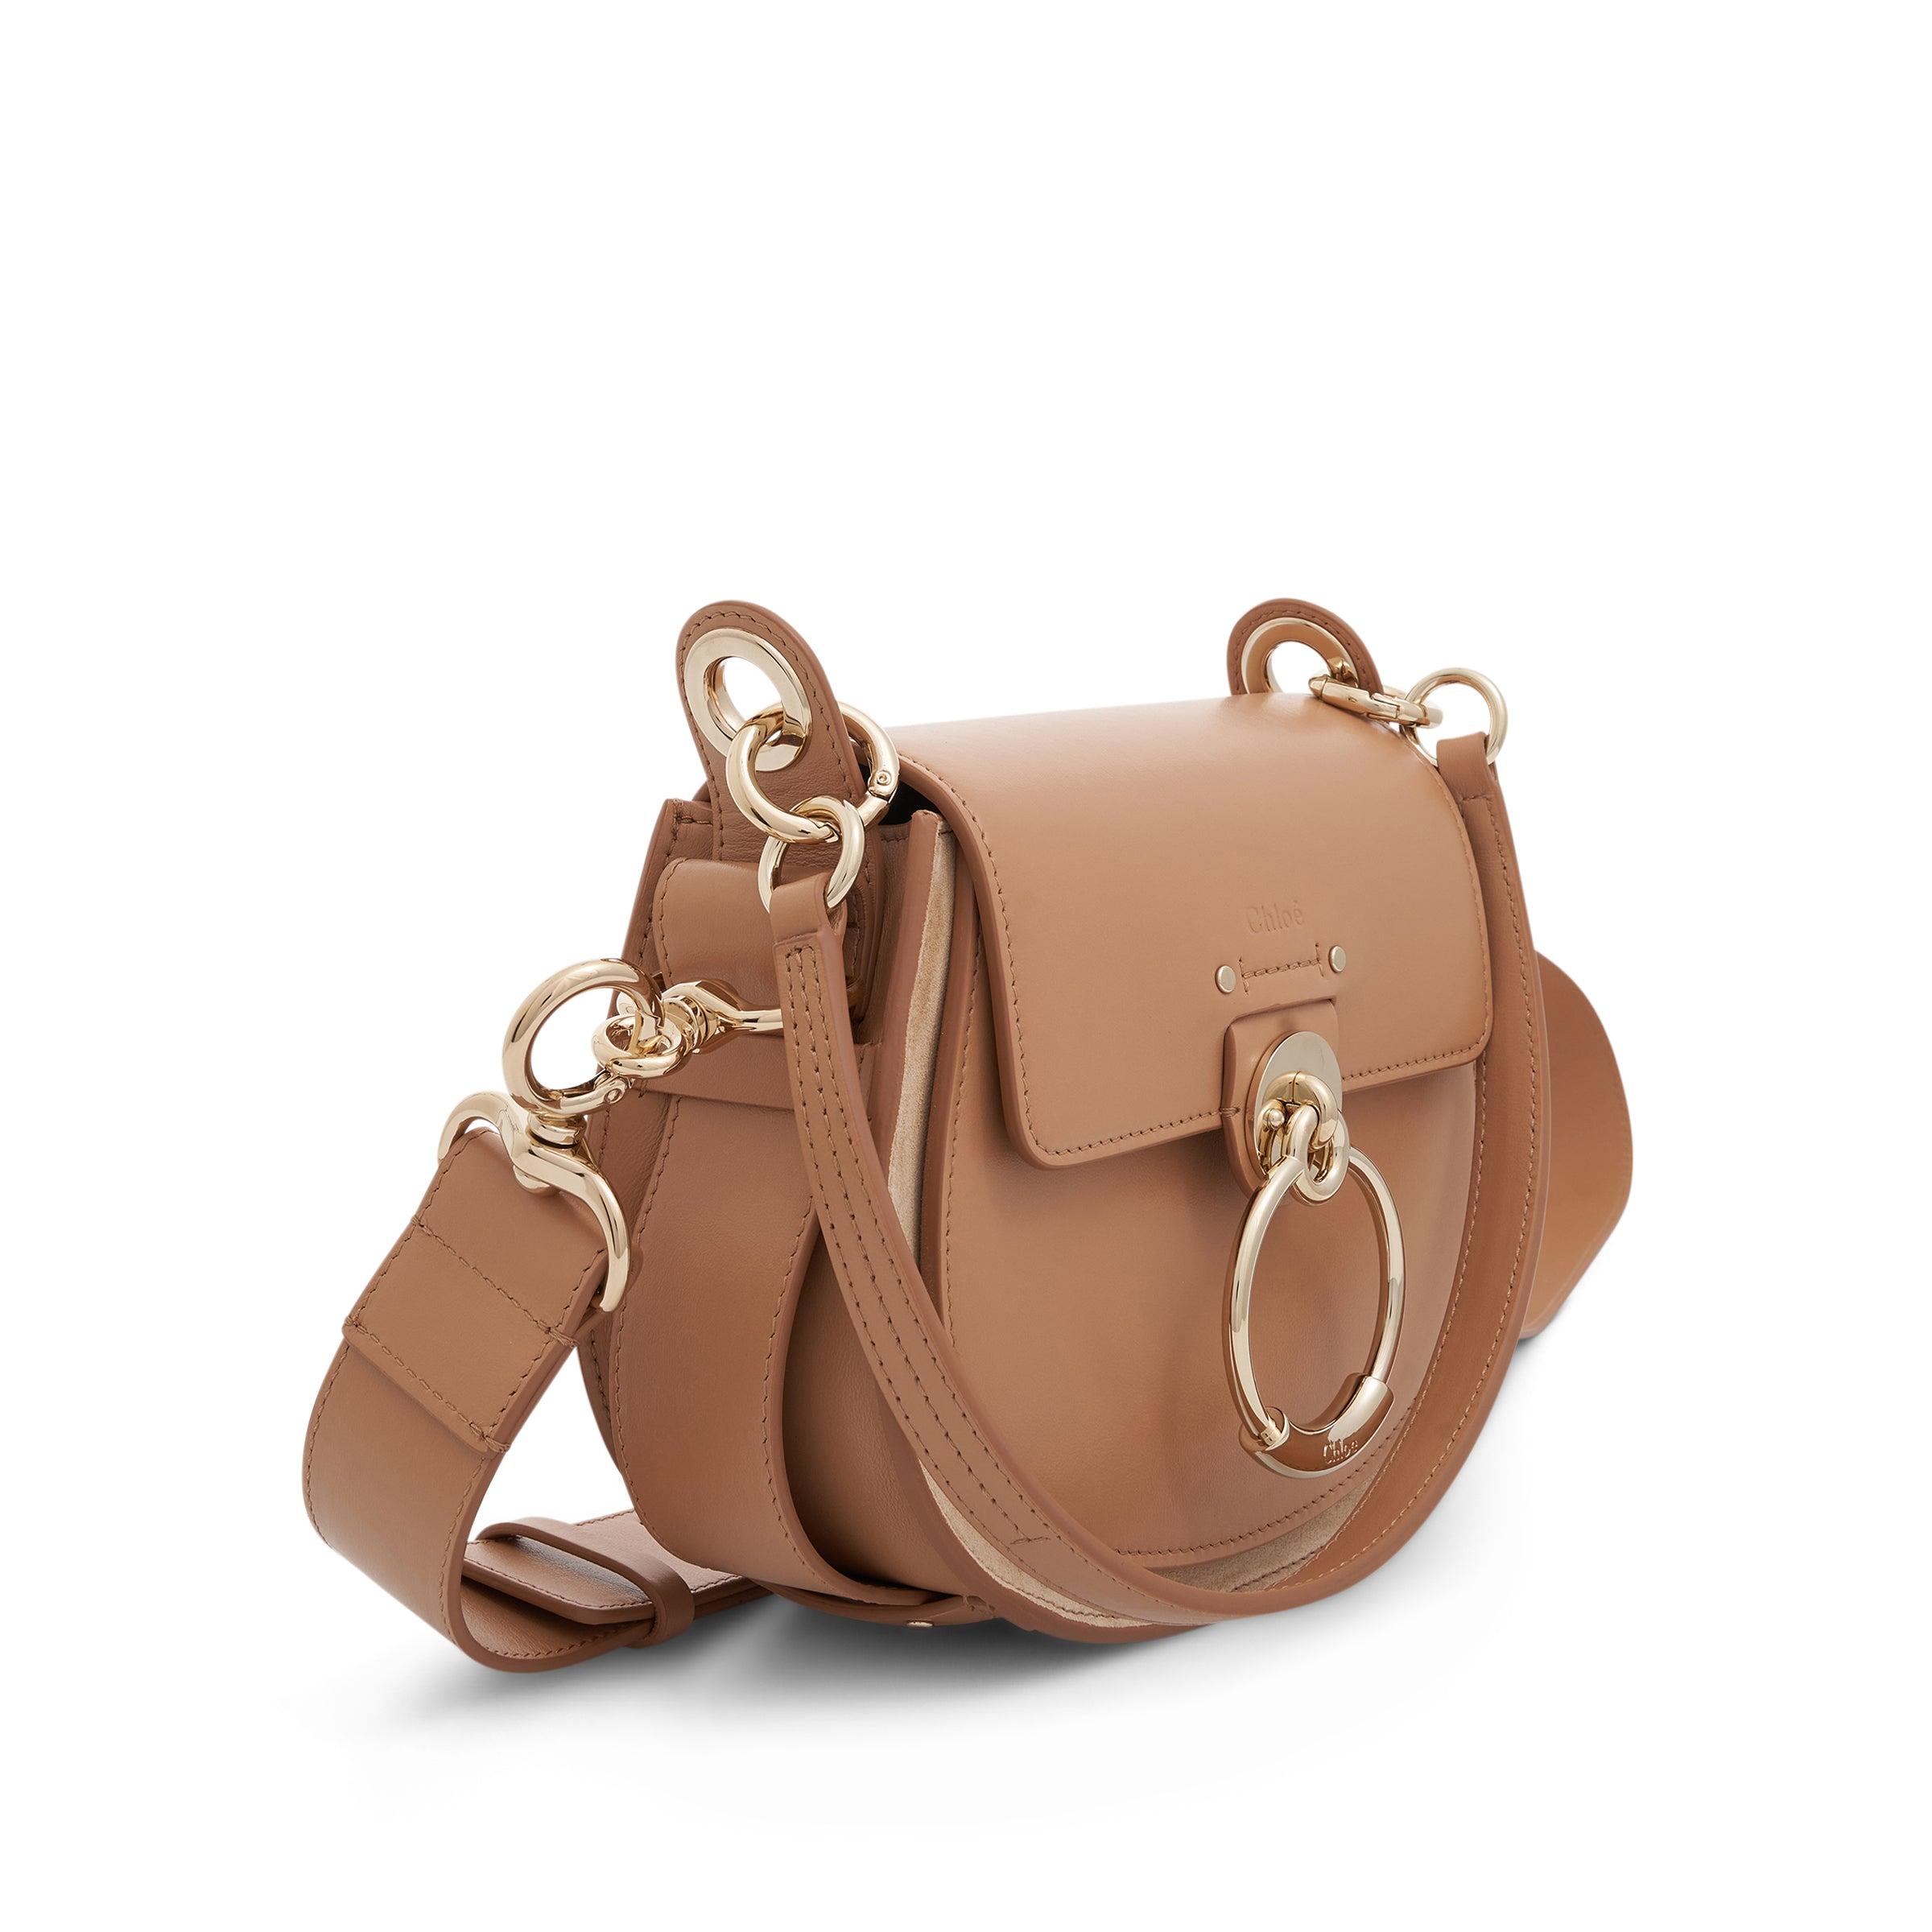 Chloé Small Tess Bag In Shiny & Suede Calfskin In Light Tan in Brown | Lyst